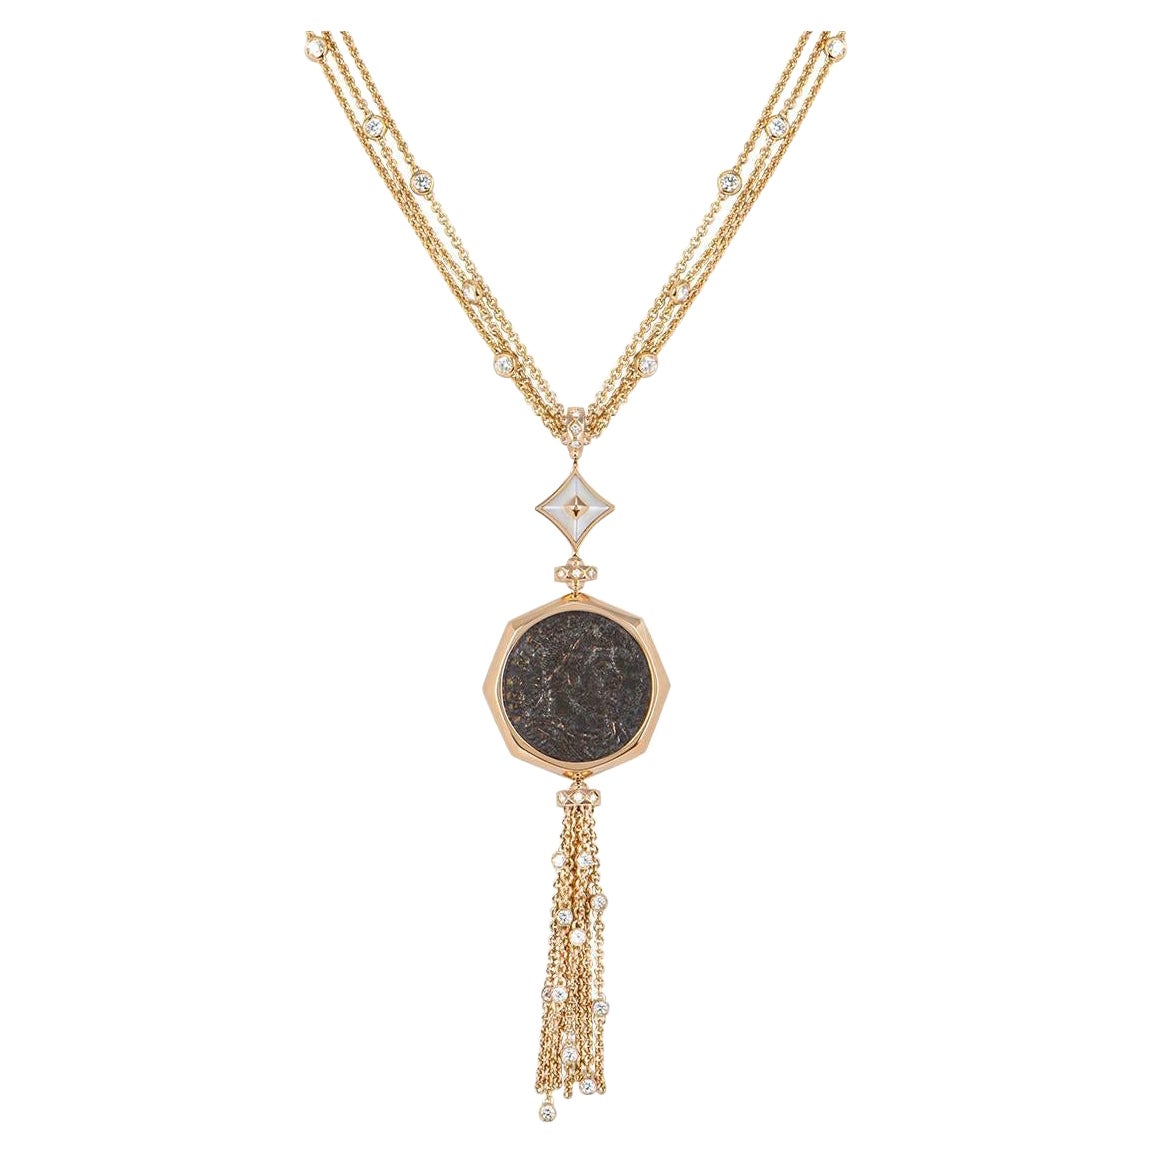 Bvlgari Rose Gold Diamond & Mother of Pearl Monete Necklace